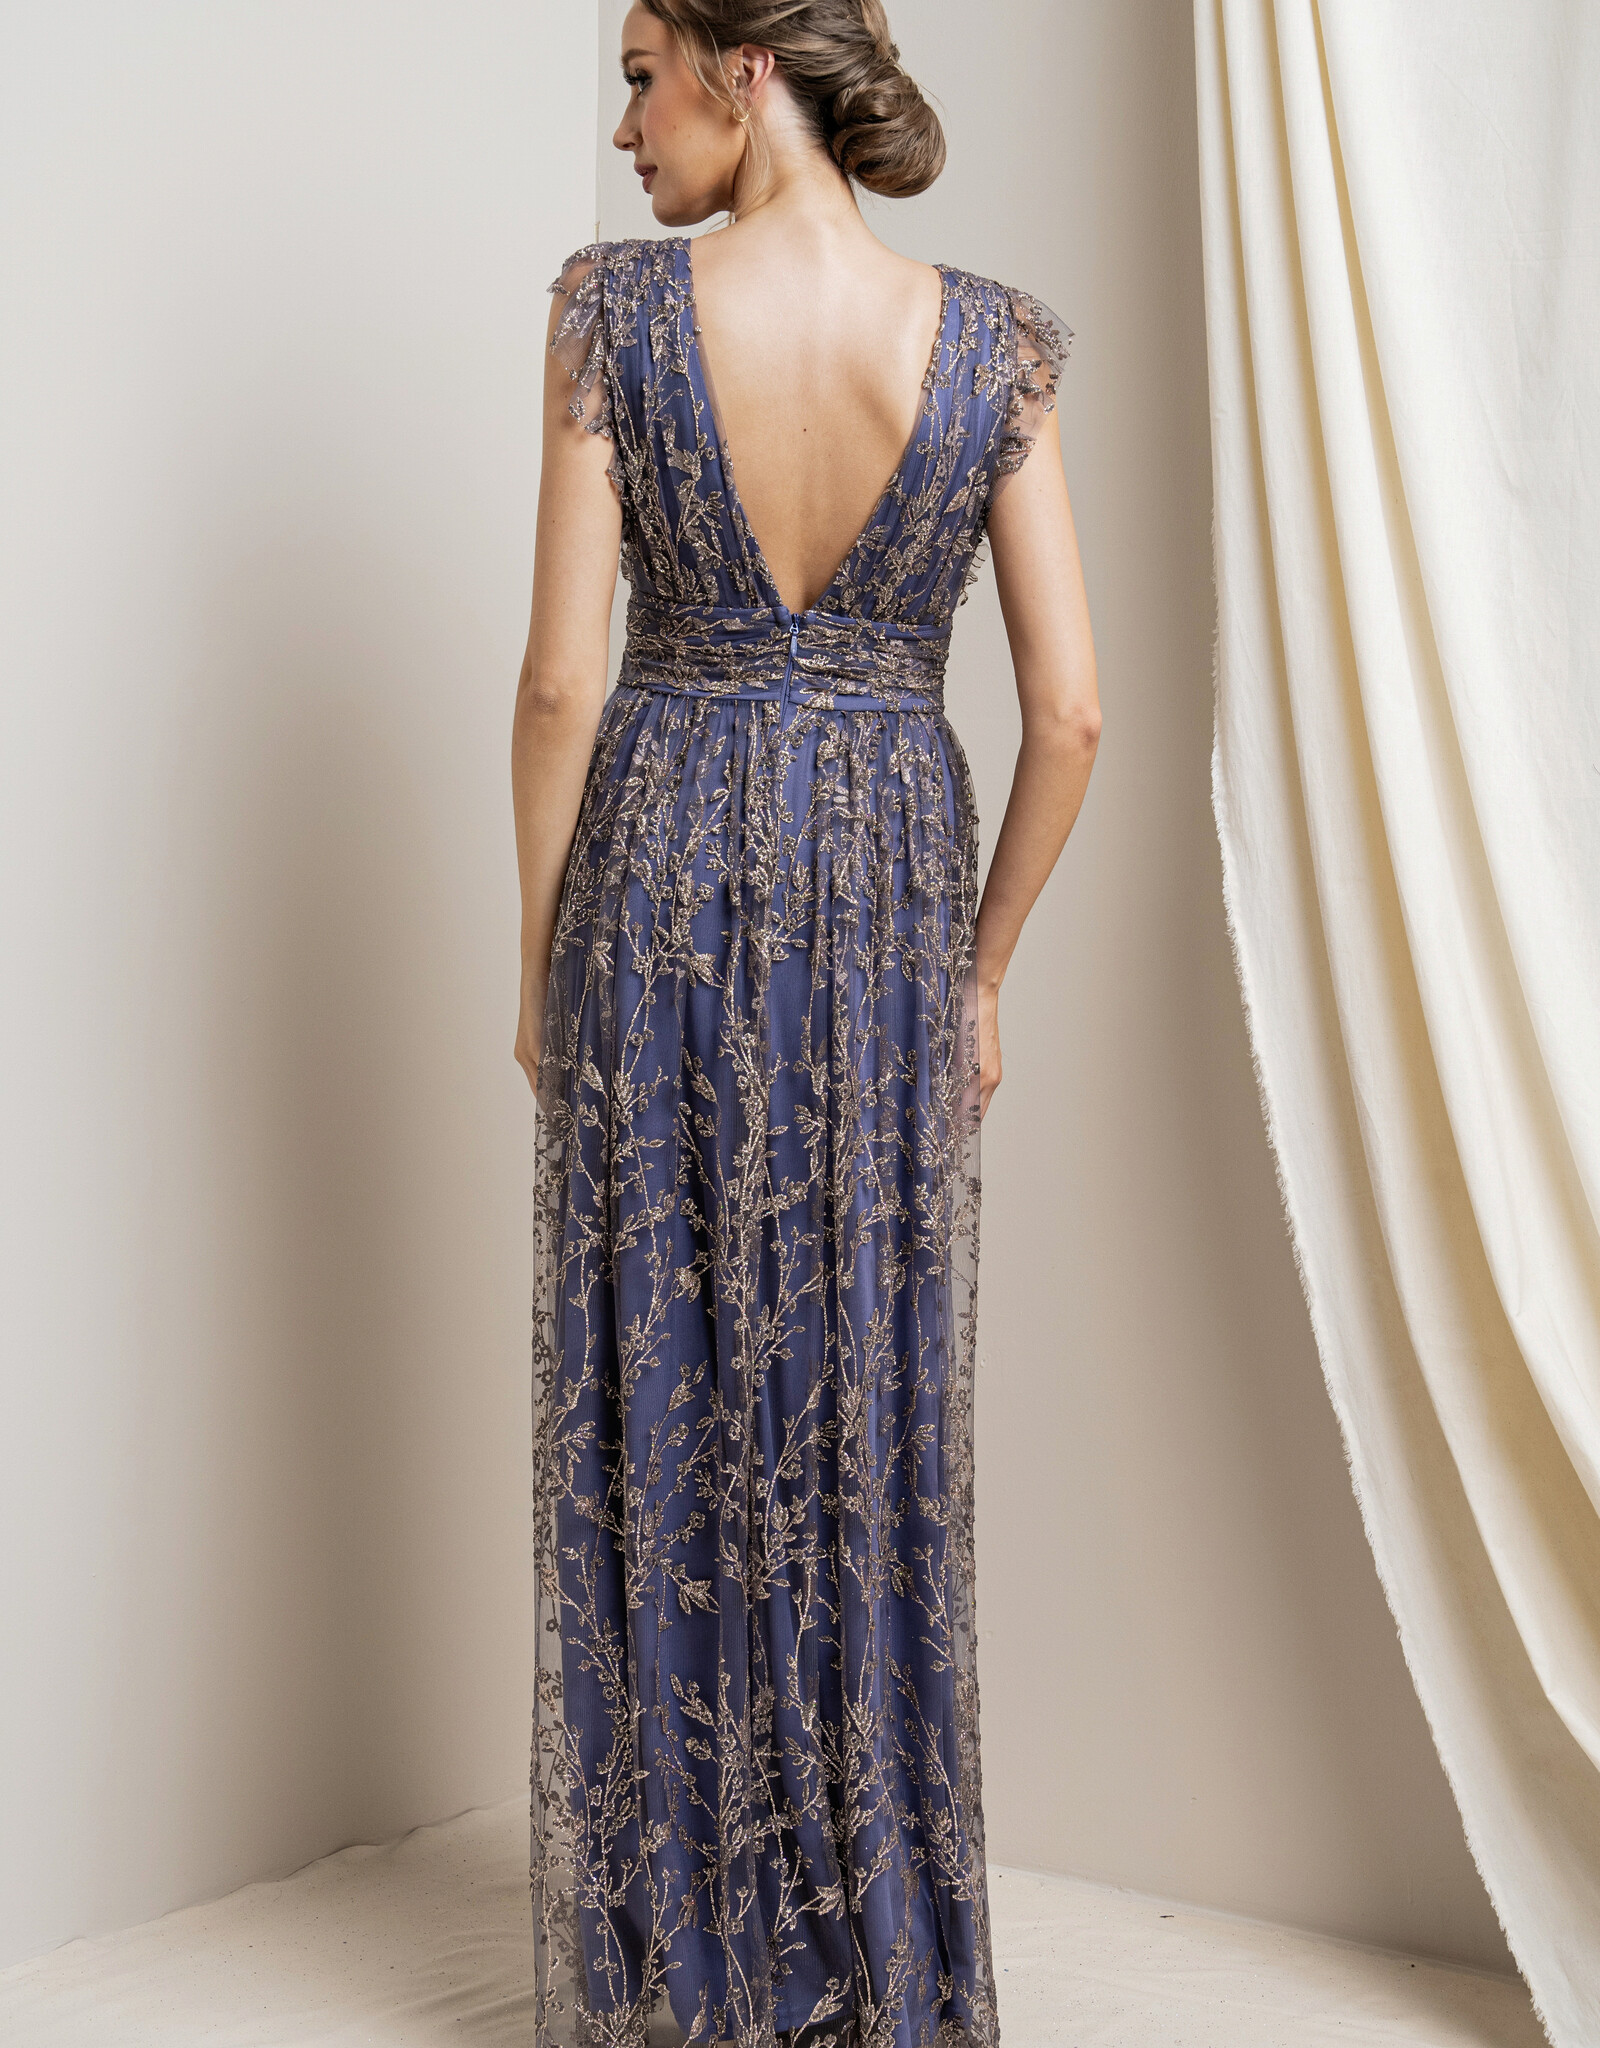 HUSH FRAIDY floral sequin gown